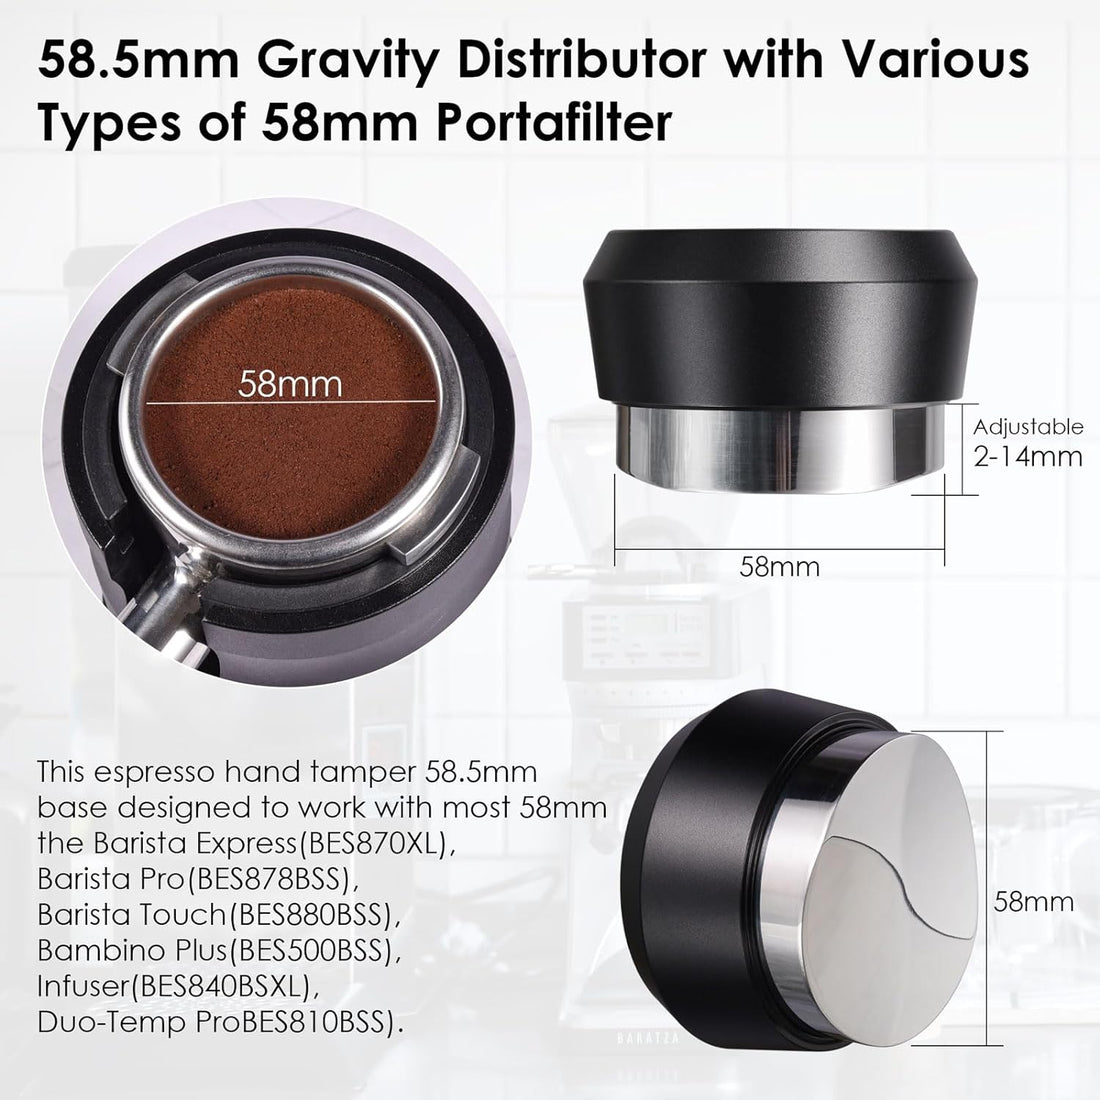 58.5mm Coffee Gravity Distributor, MATOW Espresso Adaptive Distribution Tool and Leveler Compatible with 58mm Portafilterr, Auto Leveling Distributor with Unique Stainless Steel Two Sided Convex Base